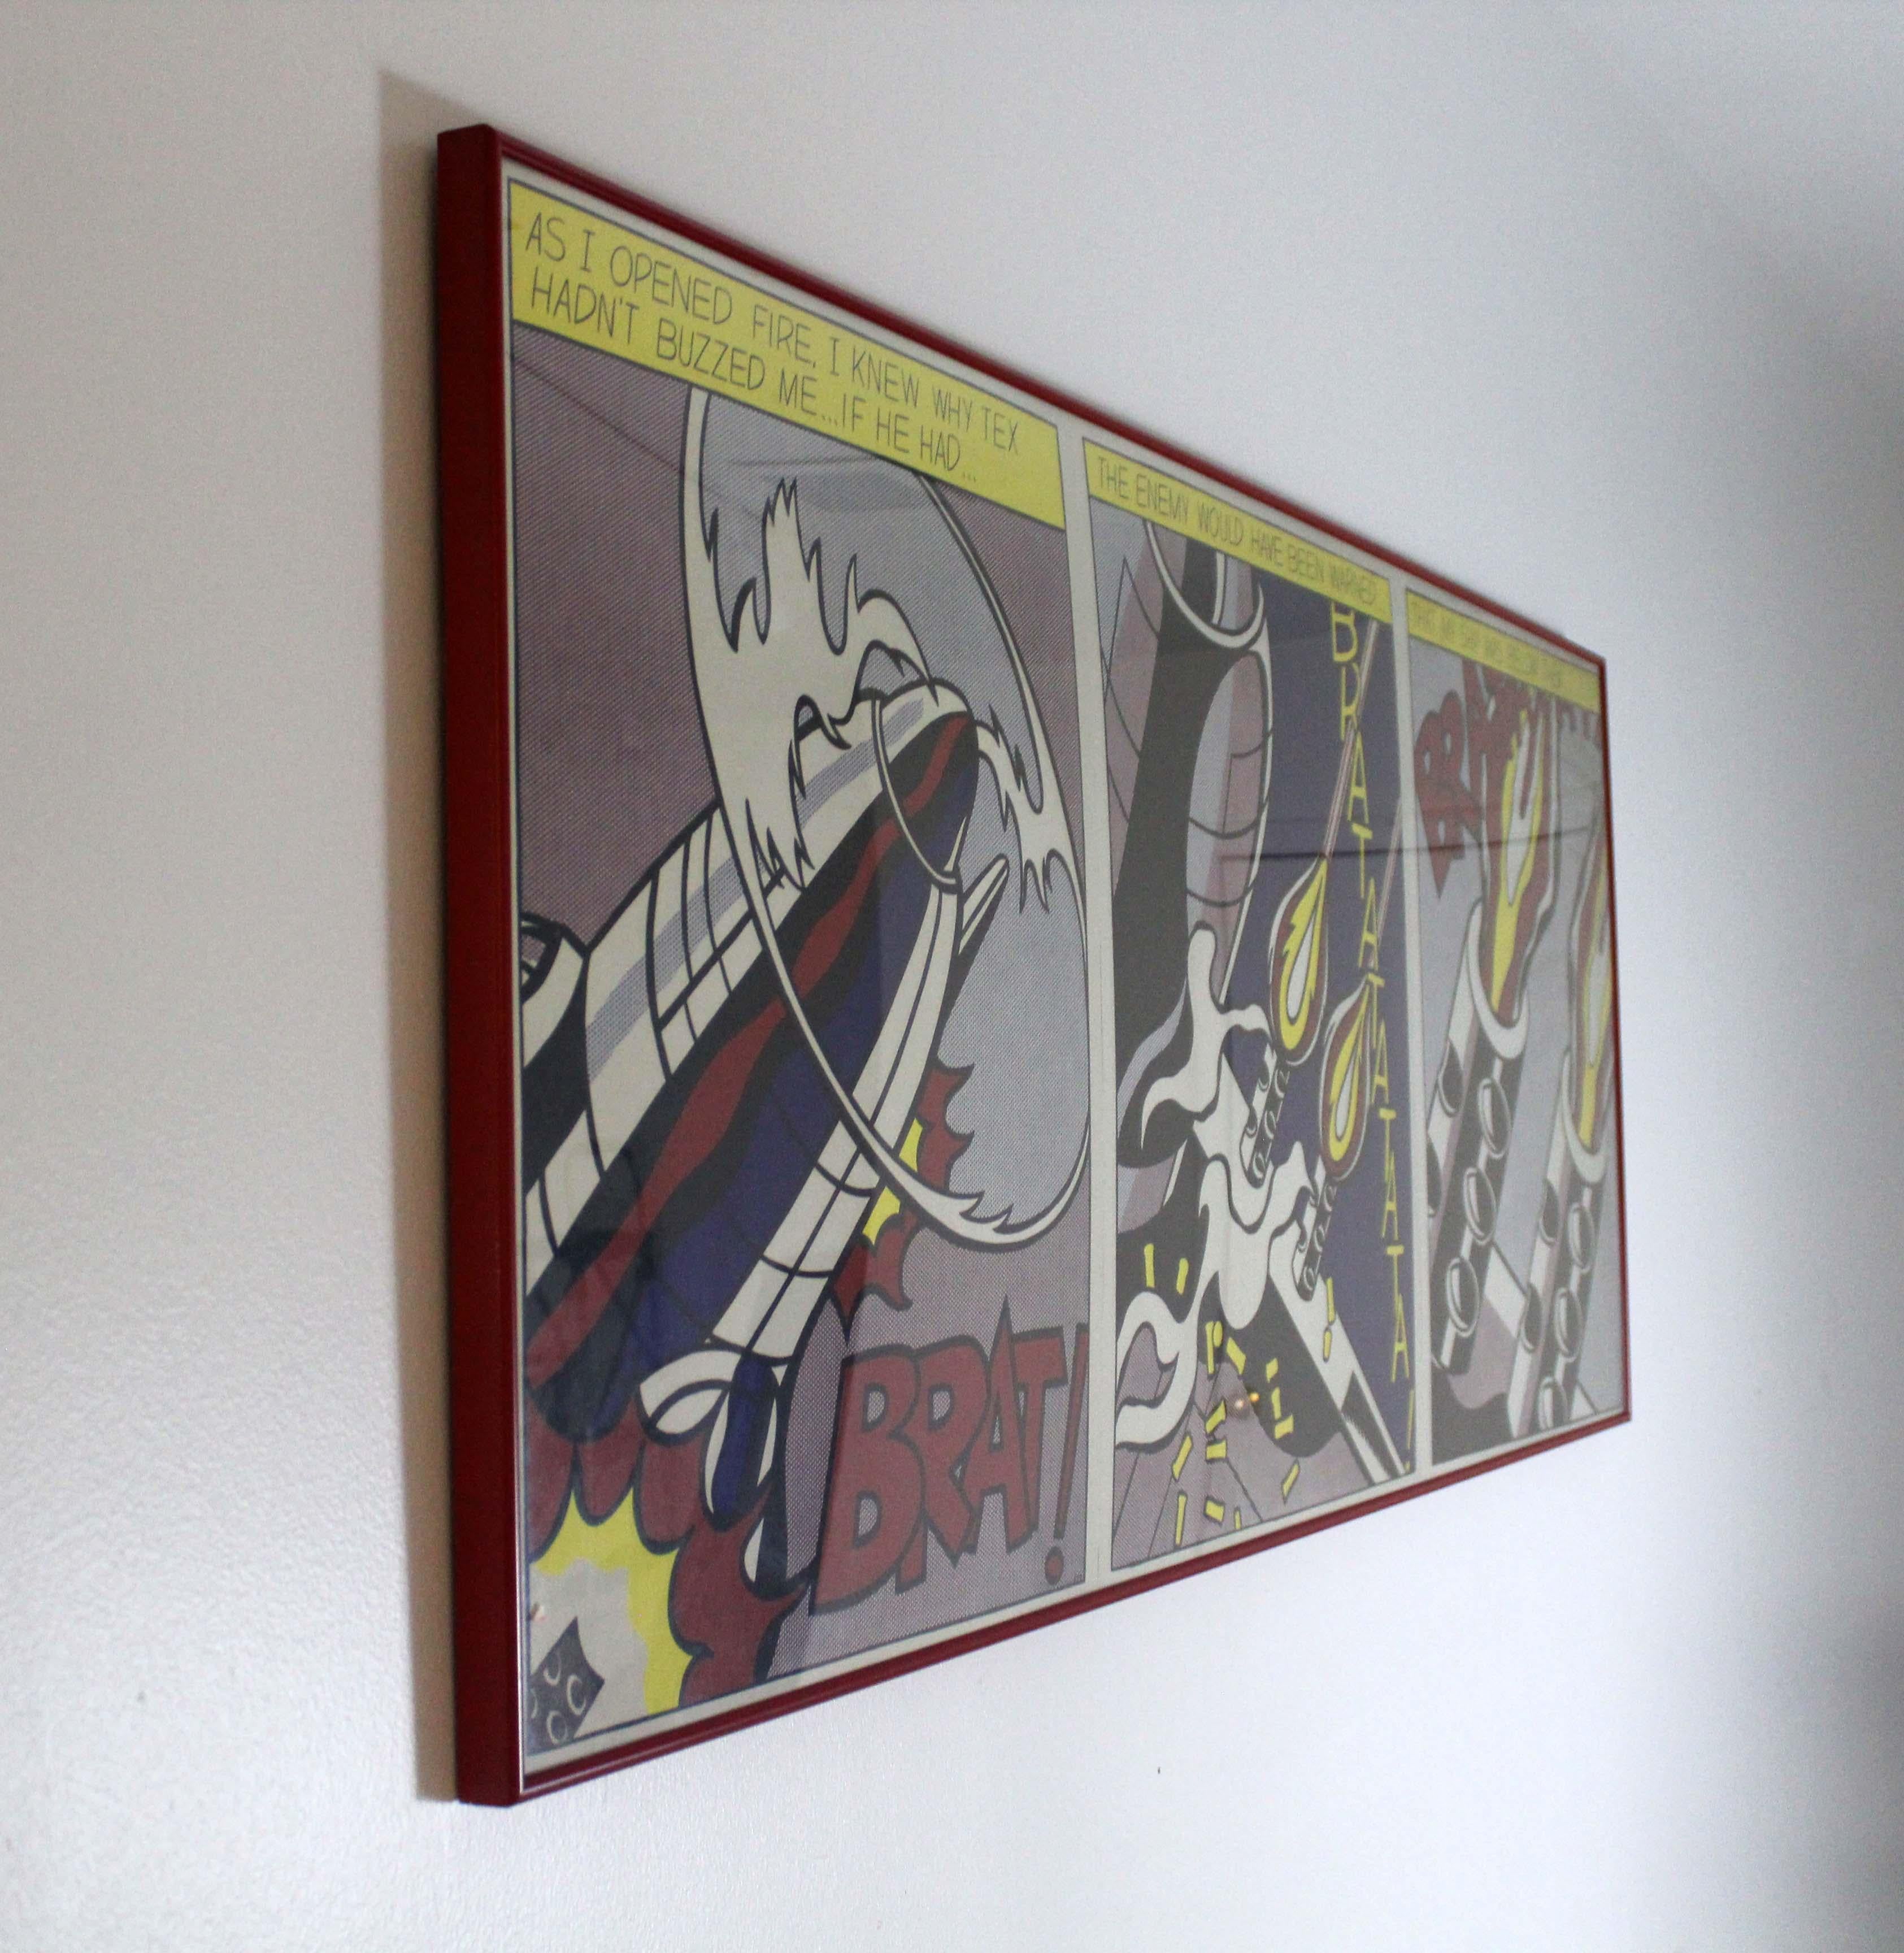 An iconic pop art vintage poster depicting Roy Lichtenstein's As I Opened Fire - a 1964 oil and magna on canvas painting. The work is hosted at the Stedelijk Museum in Amsterdam. The source of the subject matter is Jerry Grandenetti's panels from